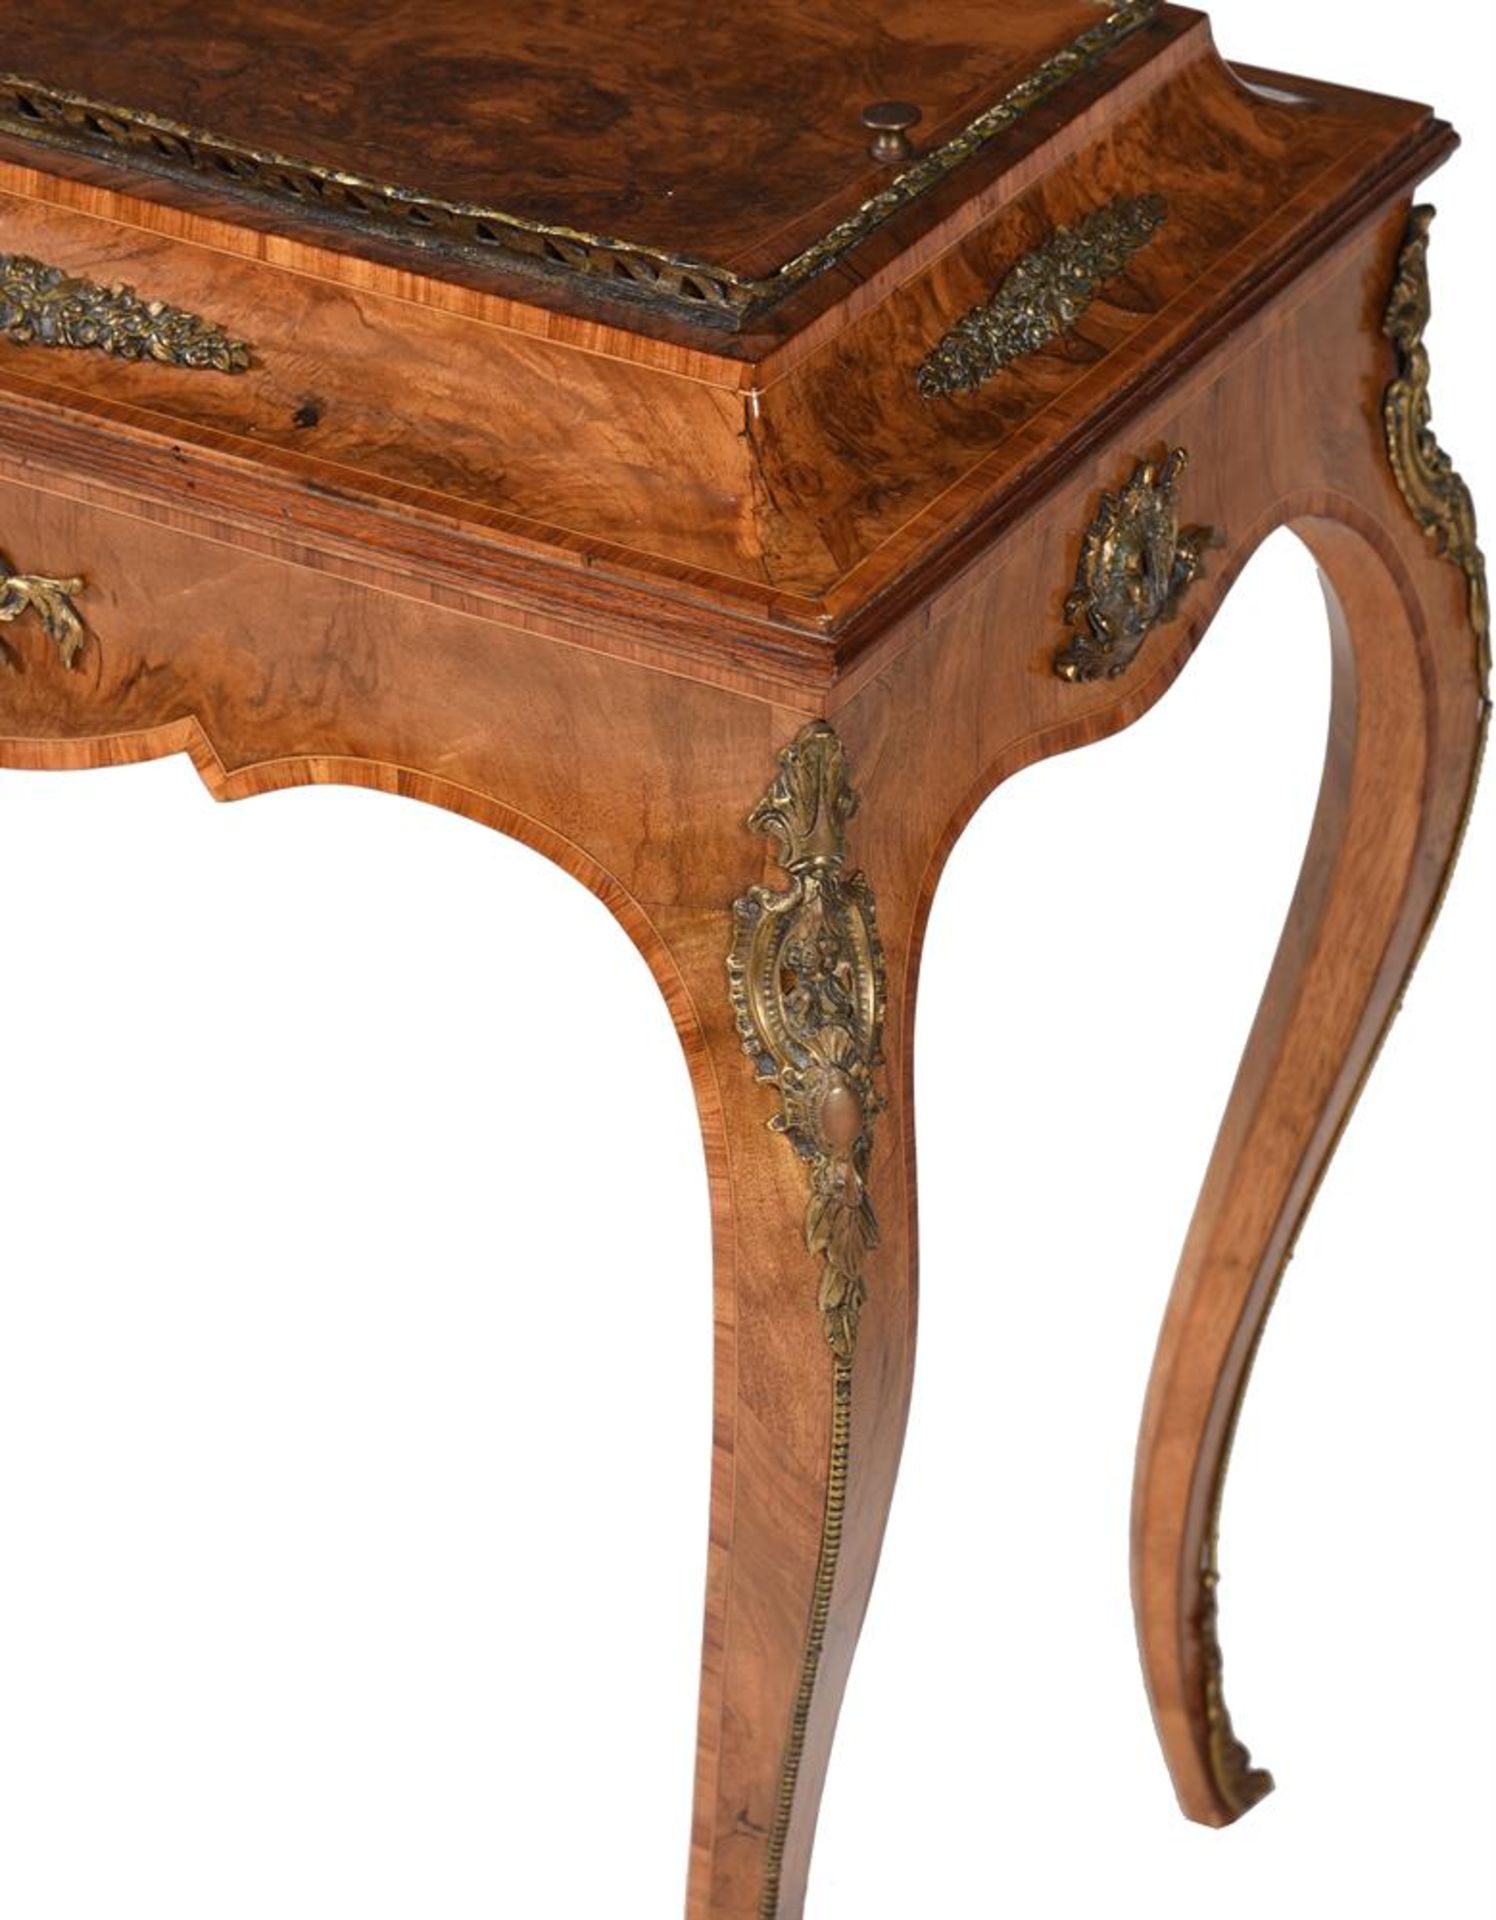 A FRENCH WALNUT AND GILT METAL MOUNTED JARDINIERE - Image 2 of 2